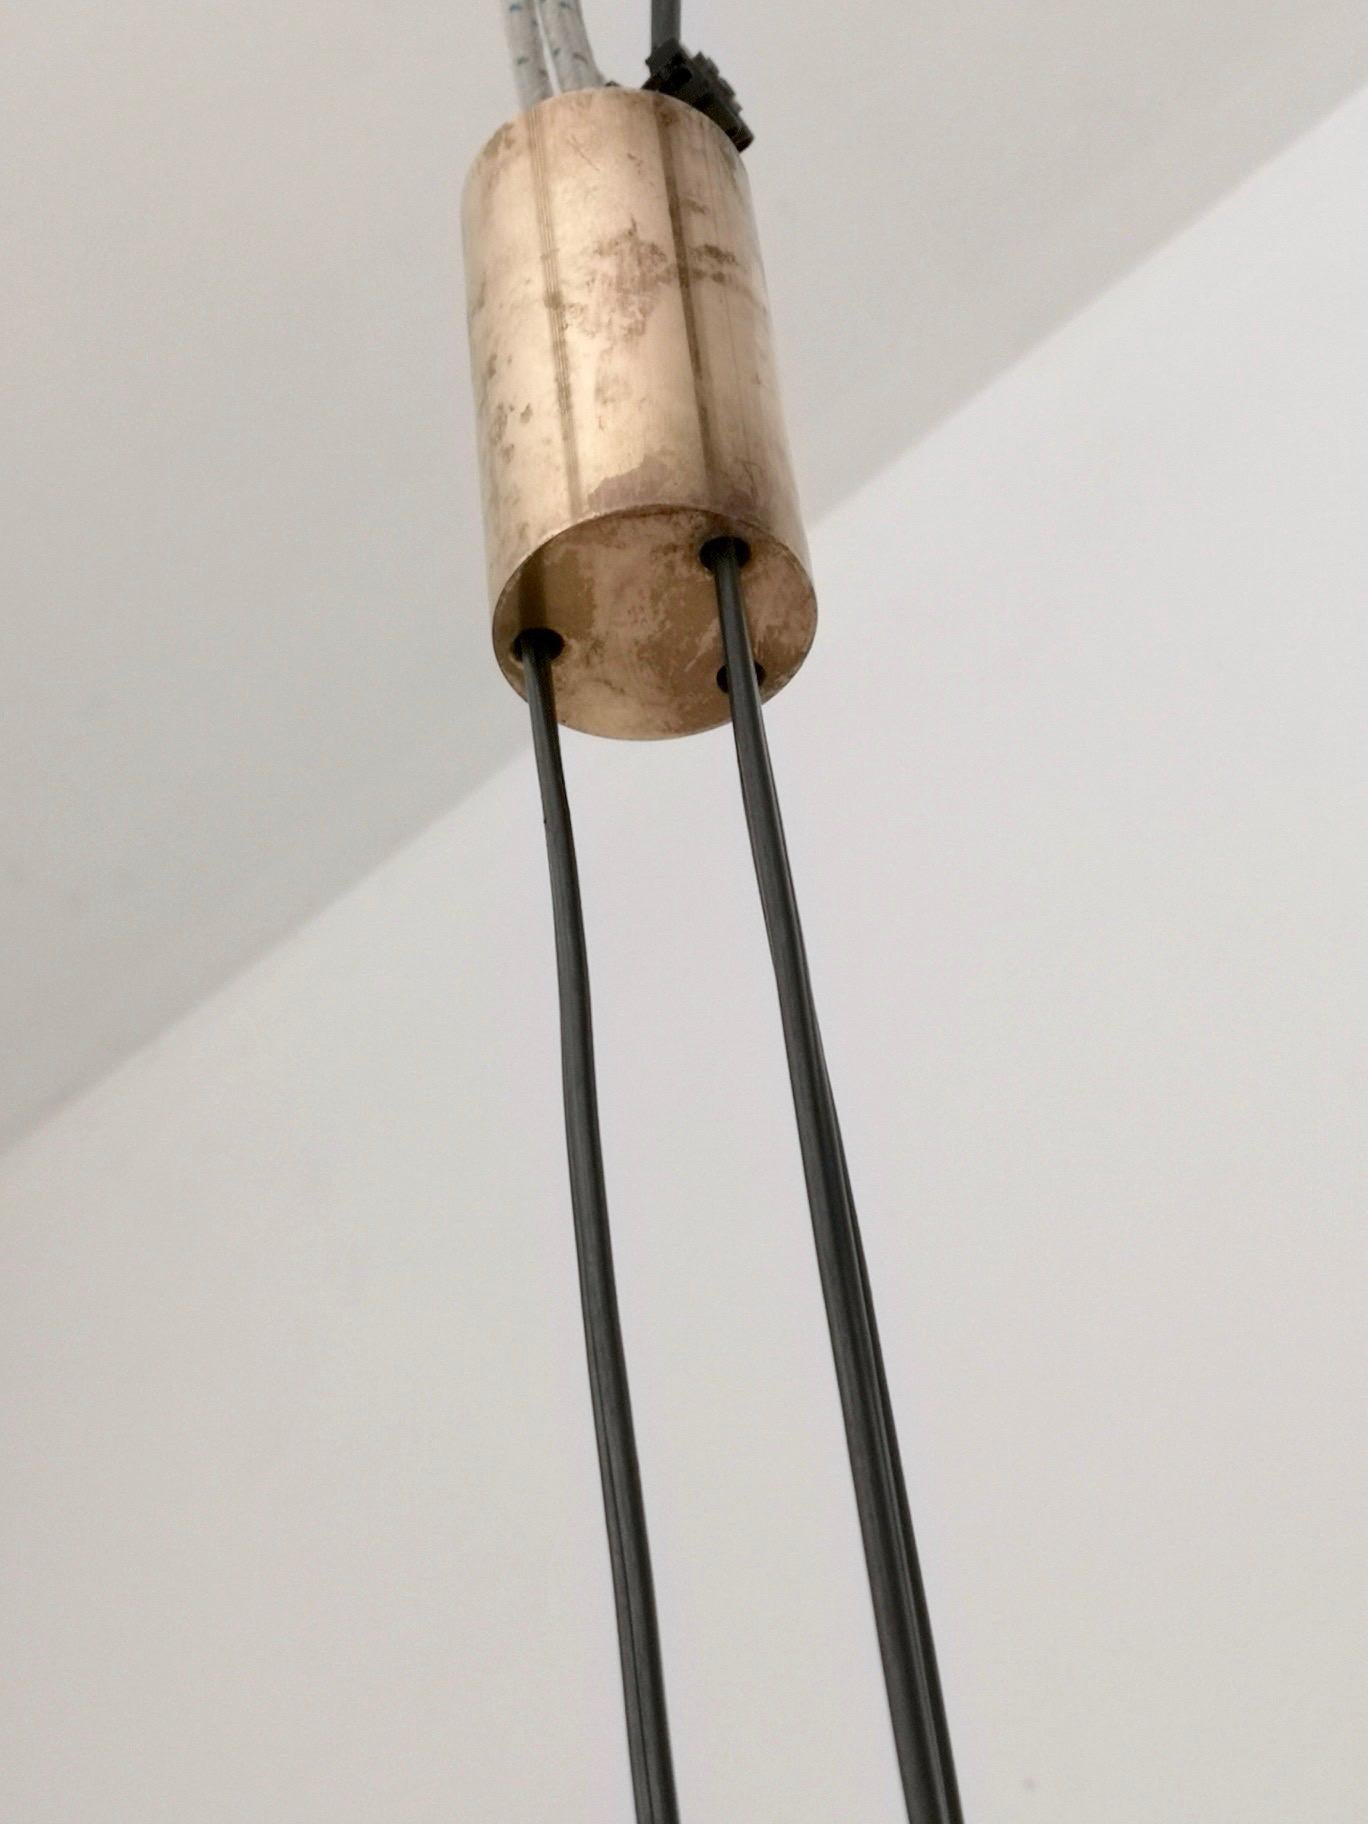 Midcentury Adjustable Pendant Mod. 437 by Tito Agnoli Produced by O-Luce, 1954 4